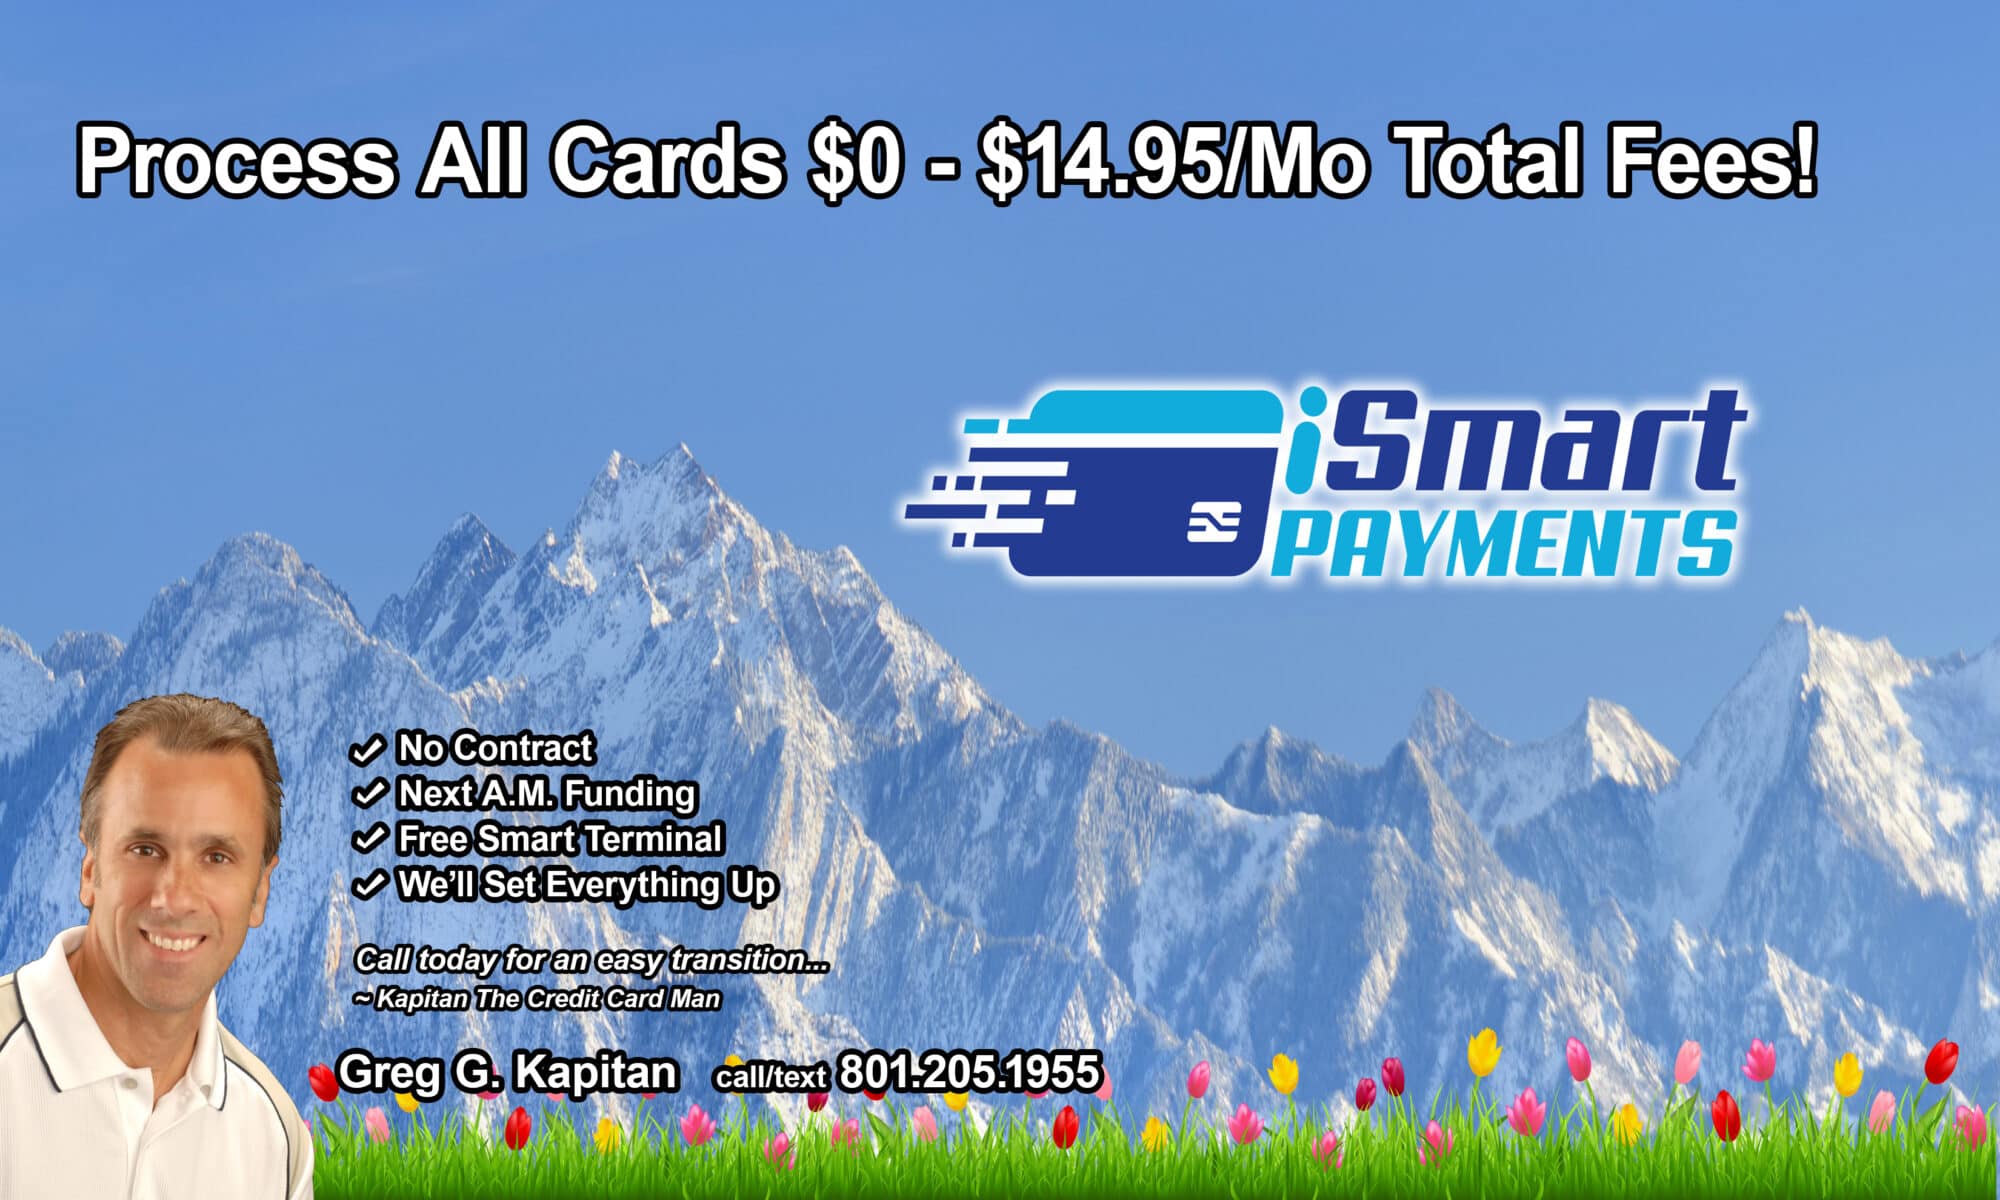 iSmart Payments Process All Cards 0 - 14.95 Website Banner copy